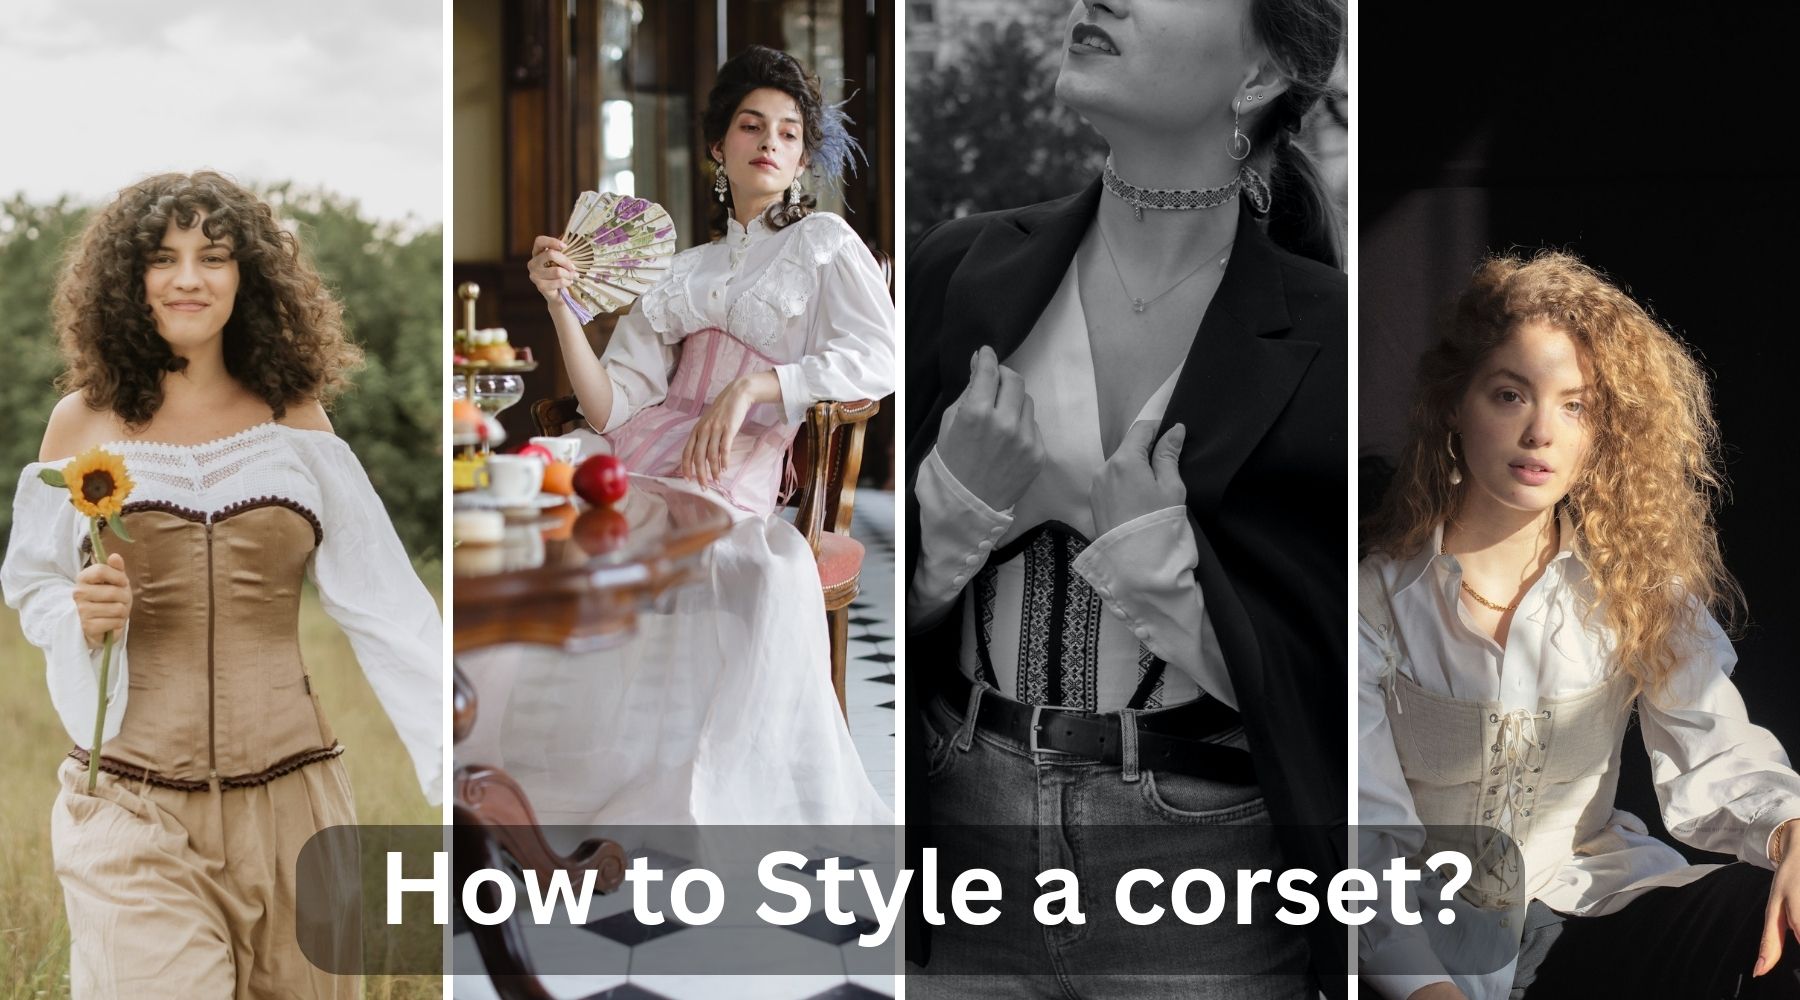 How To Style a Corset Belt - My name is Lovely!